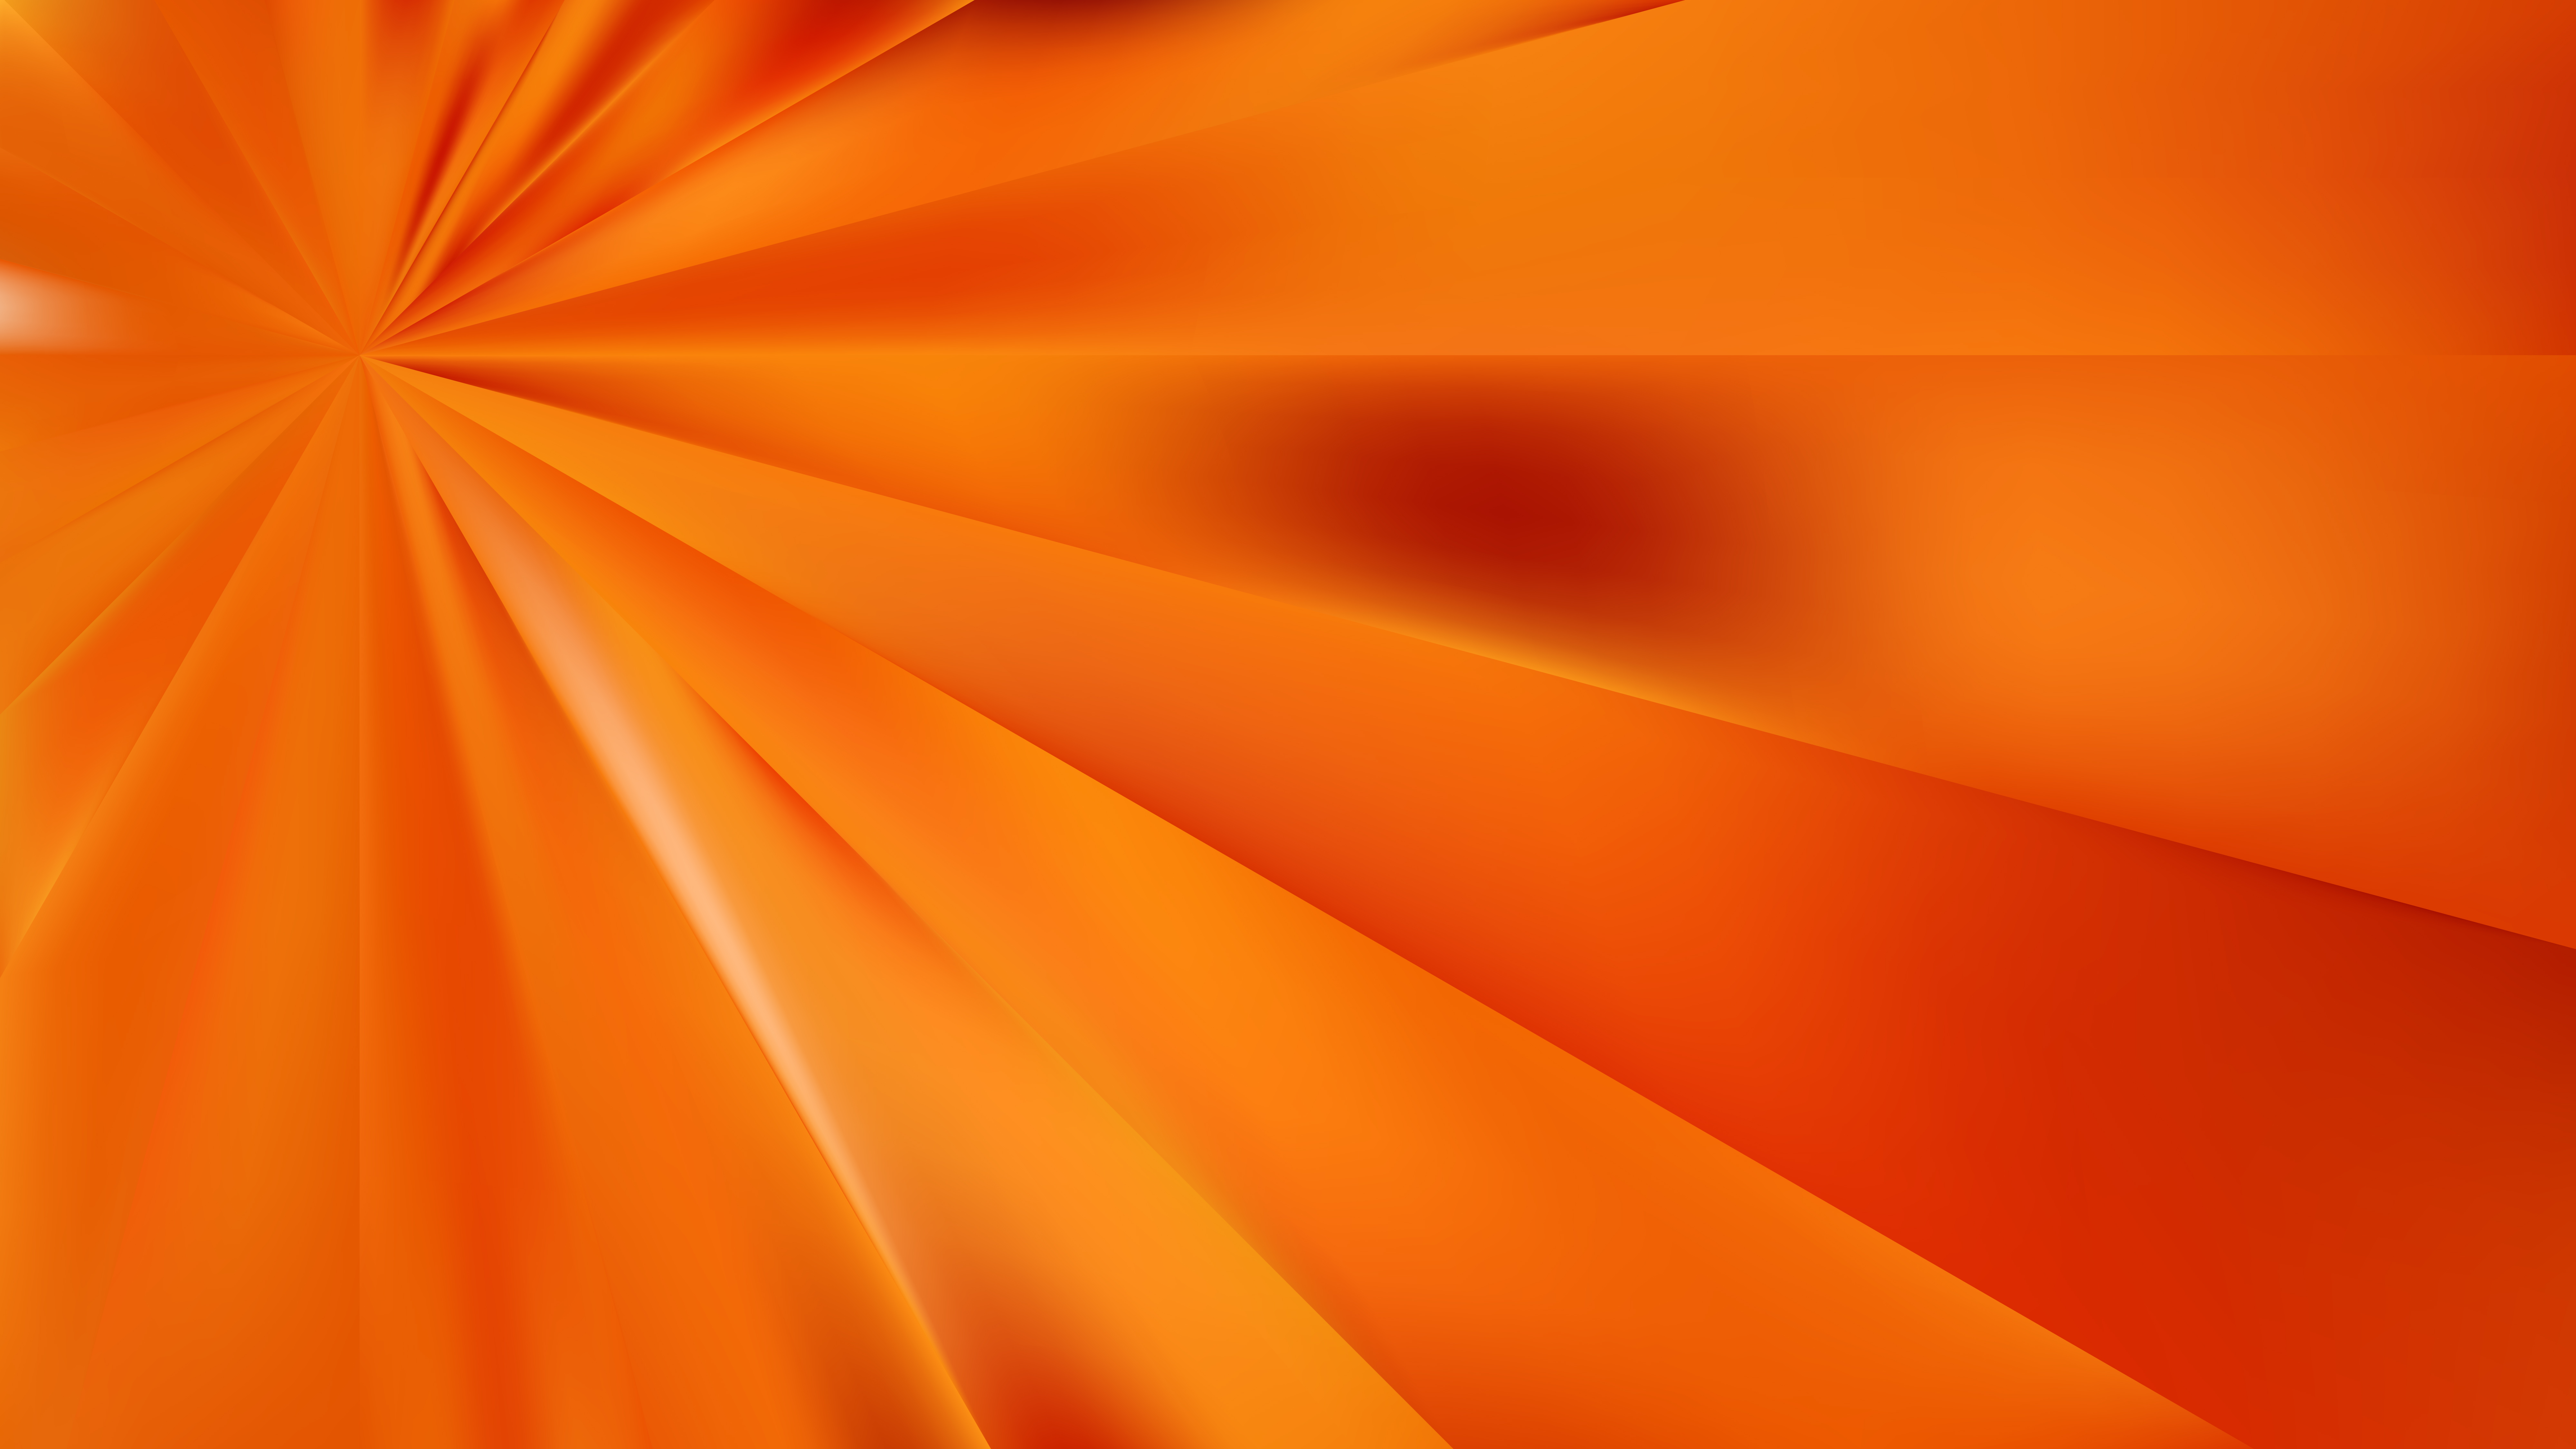 Free Abstract Red and Orange Background Graphic